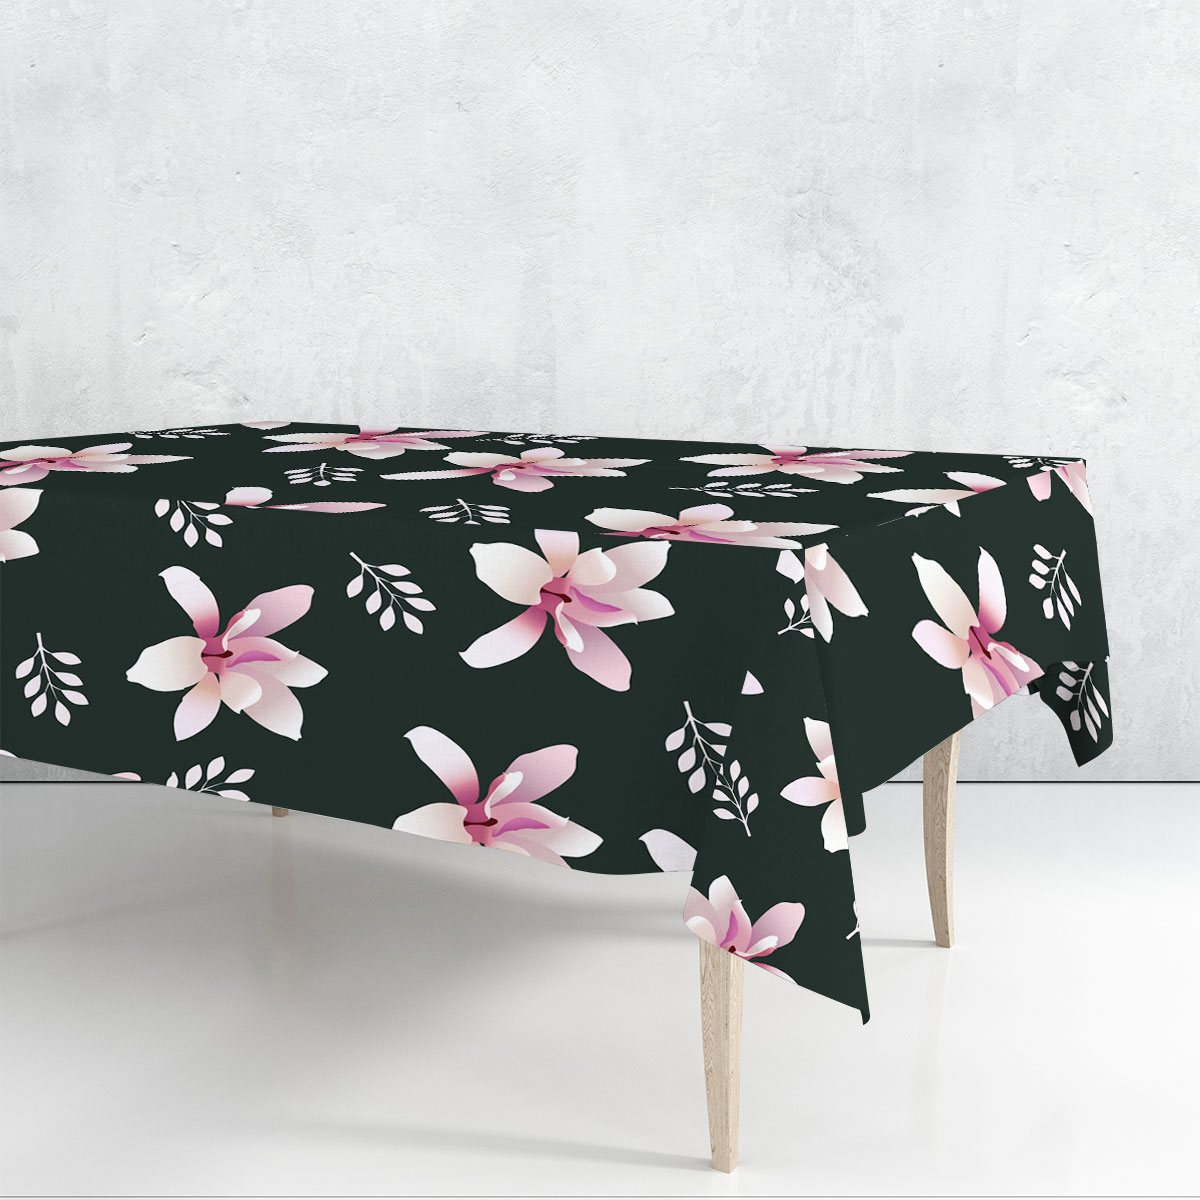 Magnolia On Black Background Rectangle Tablecloth